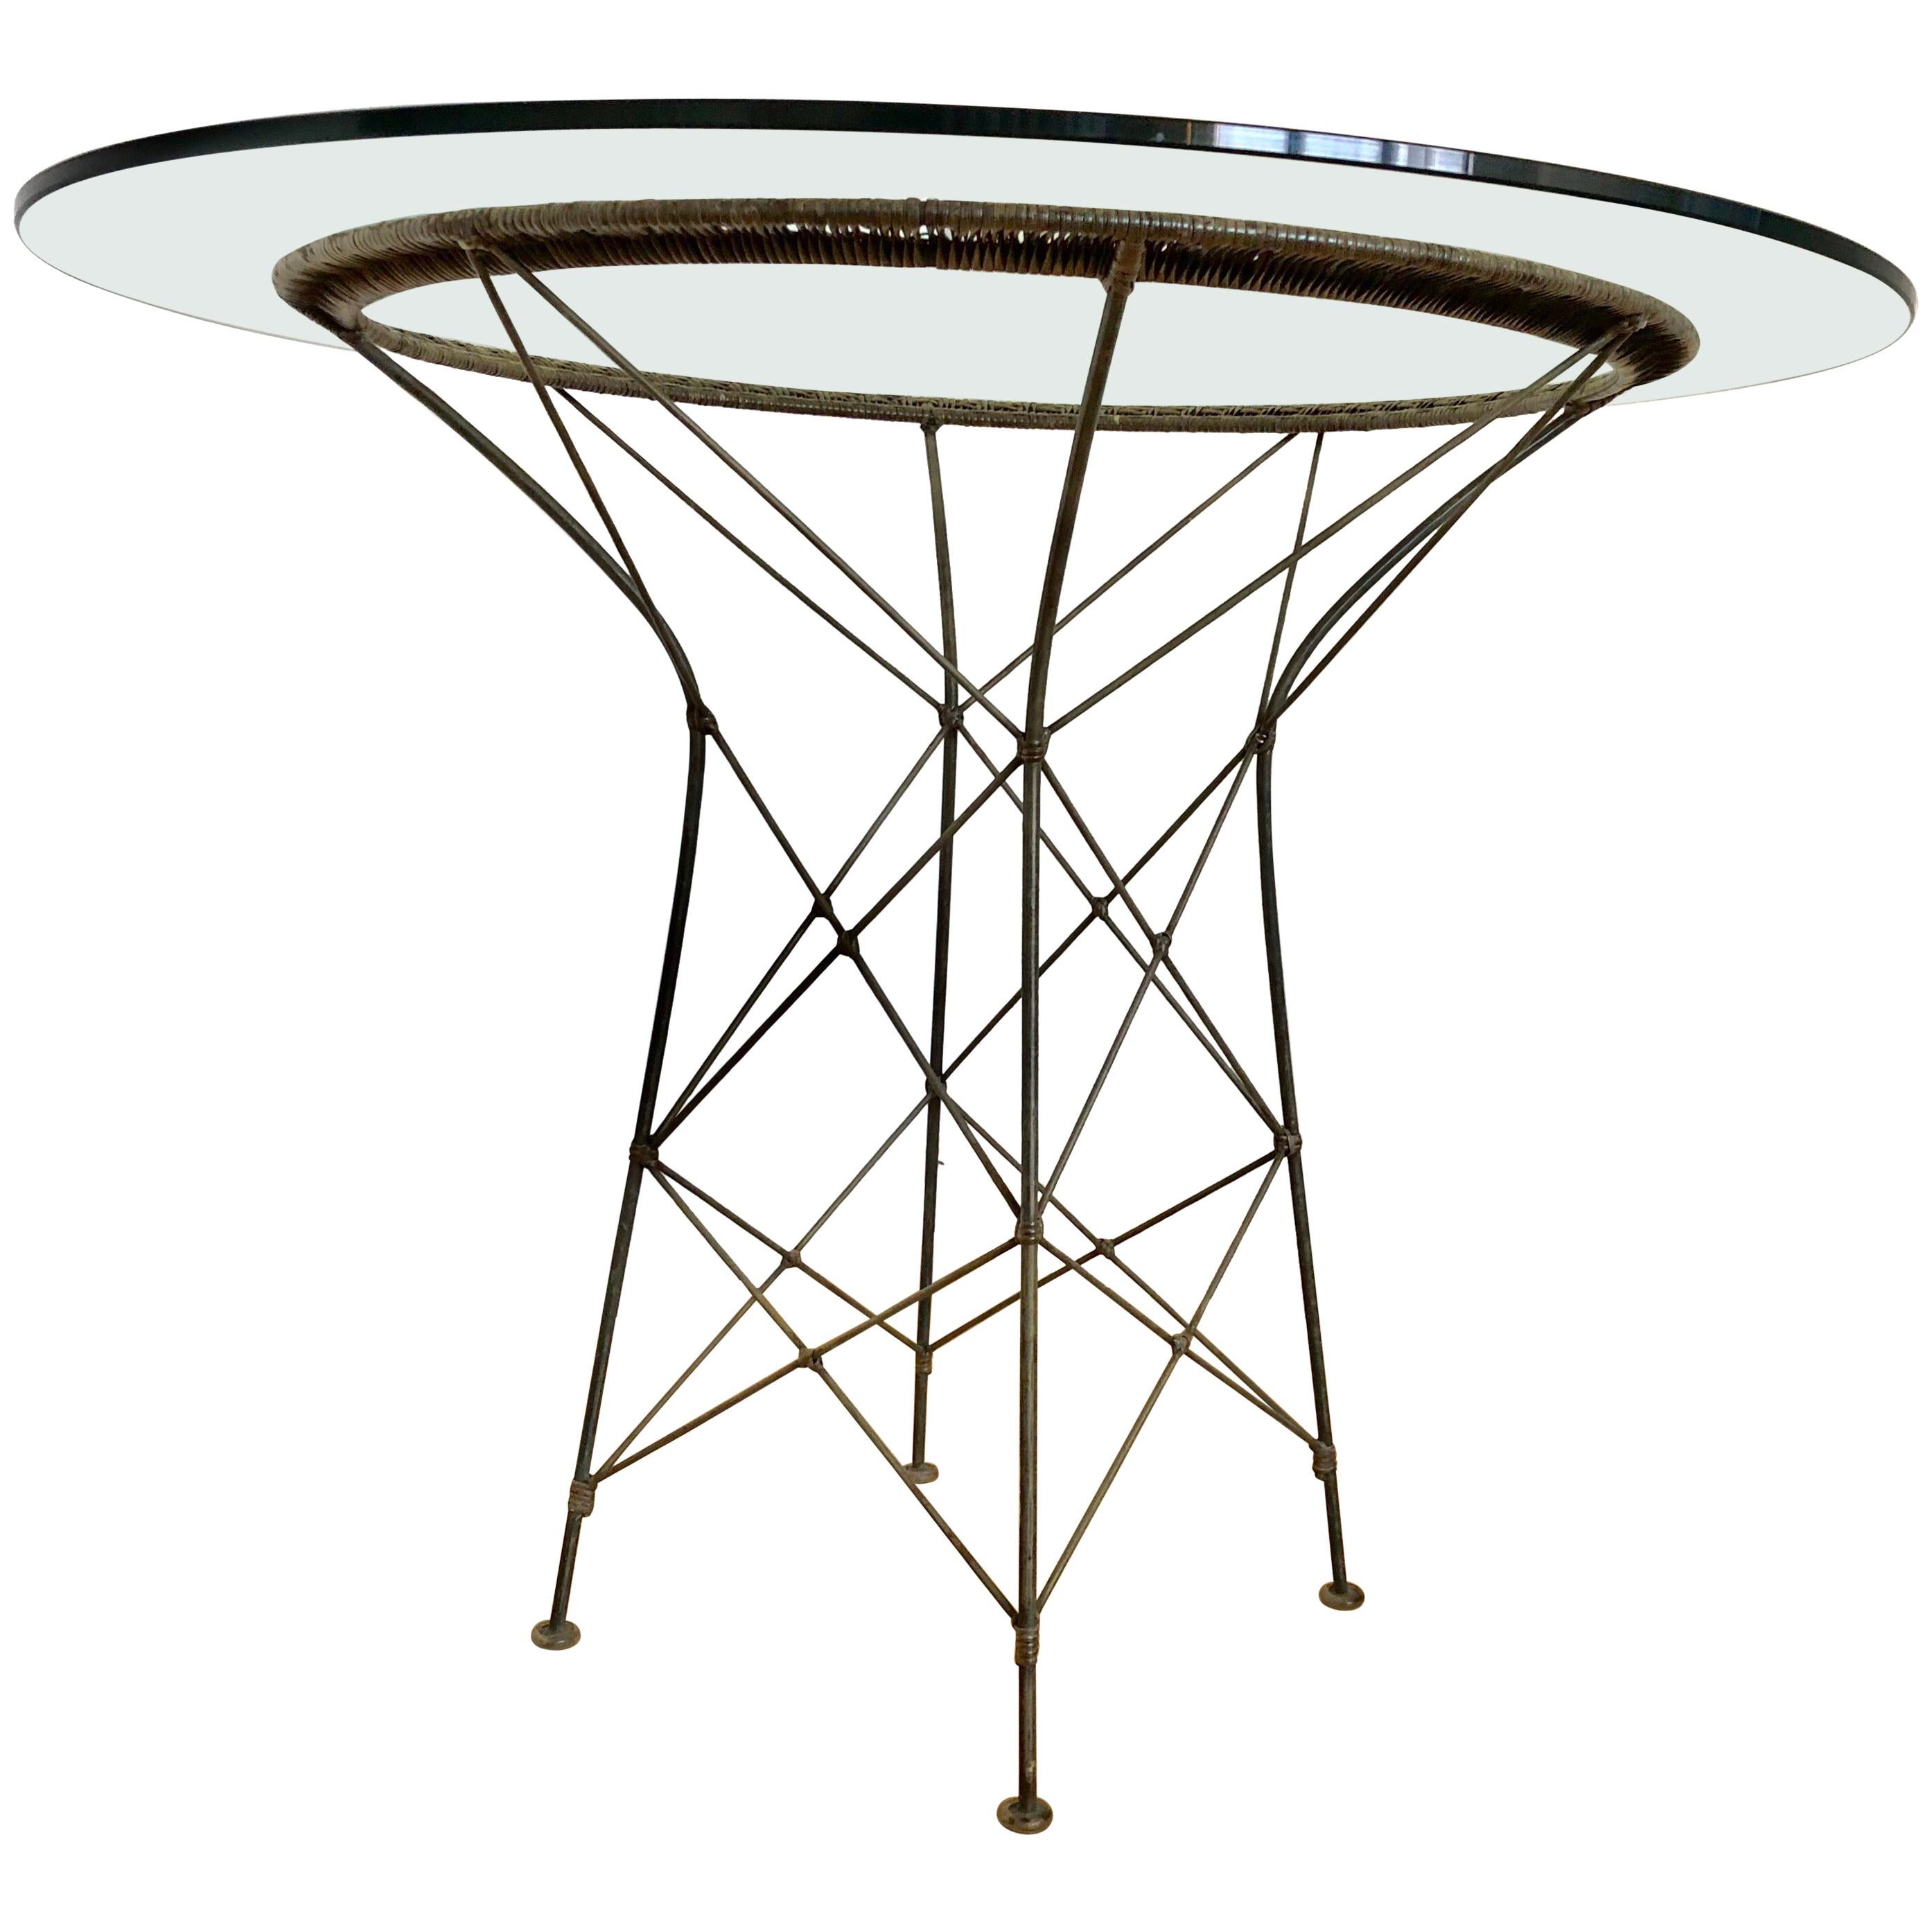 French Natural Wicker Round Dining Glass Table Wrought Iron ON SALE 